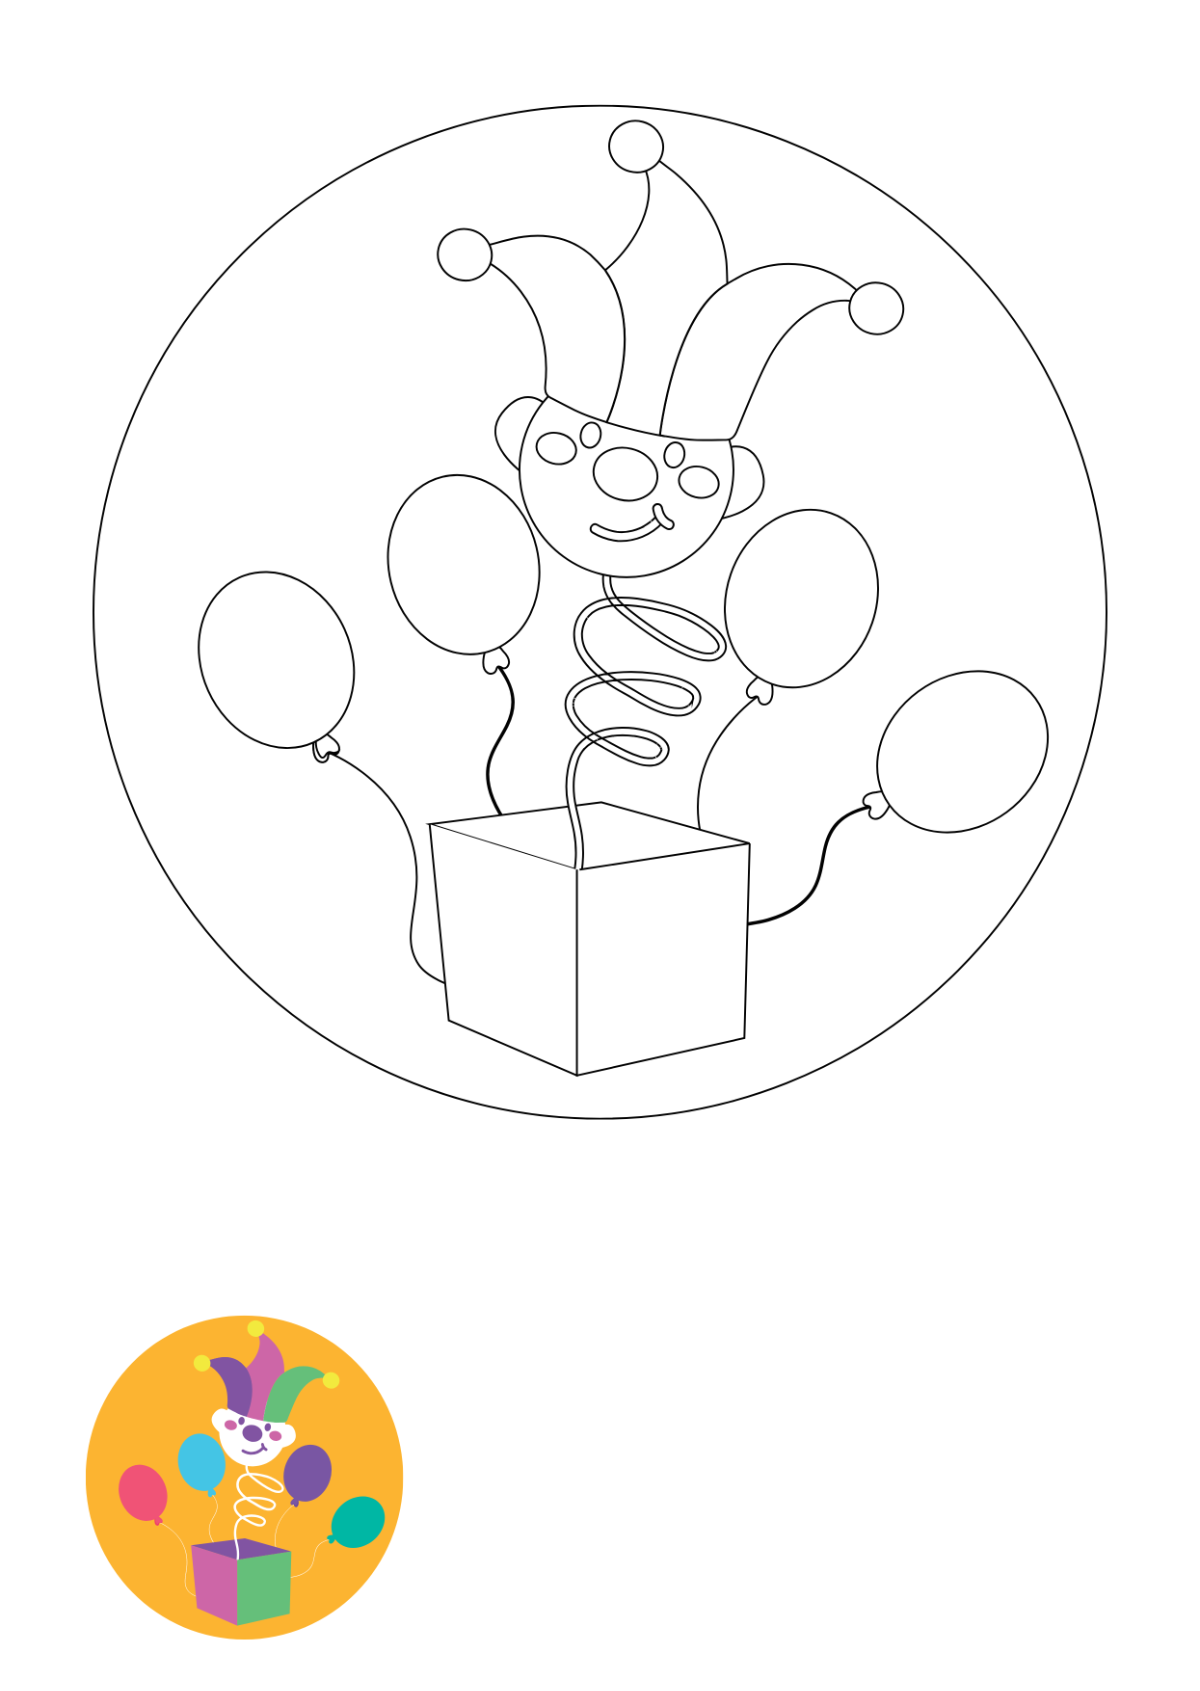 April Fools’ Day Coloring Page